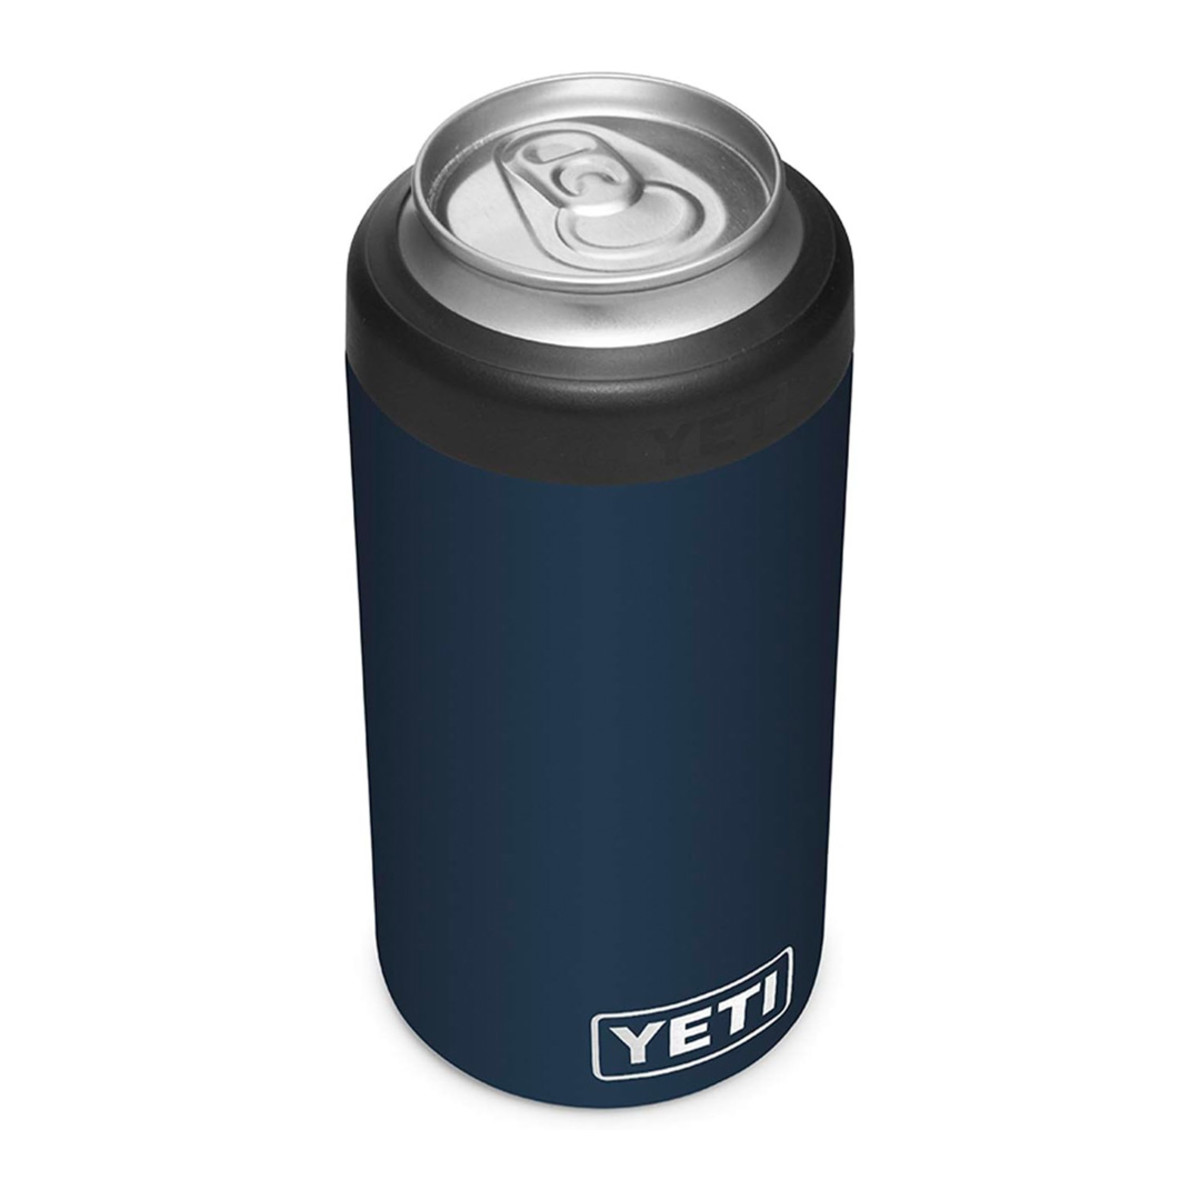 You Can Still Score Rare Black Friday Yeti Deals up to 50% Off